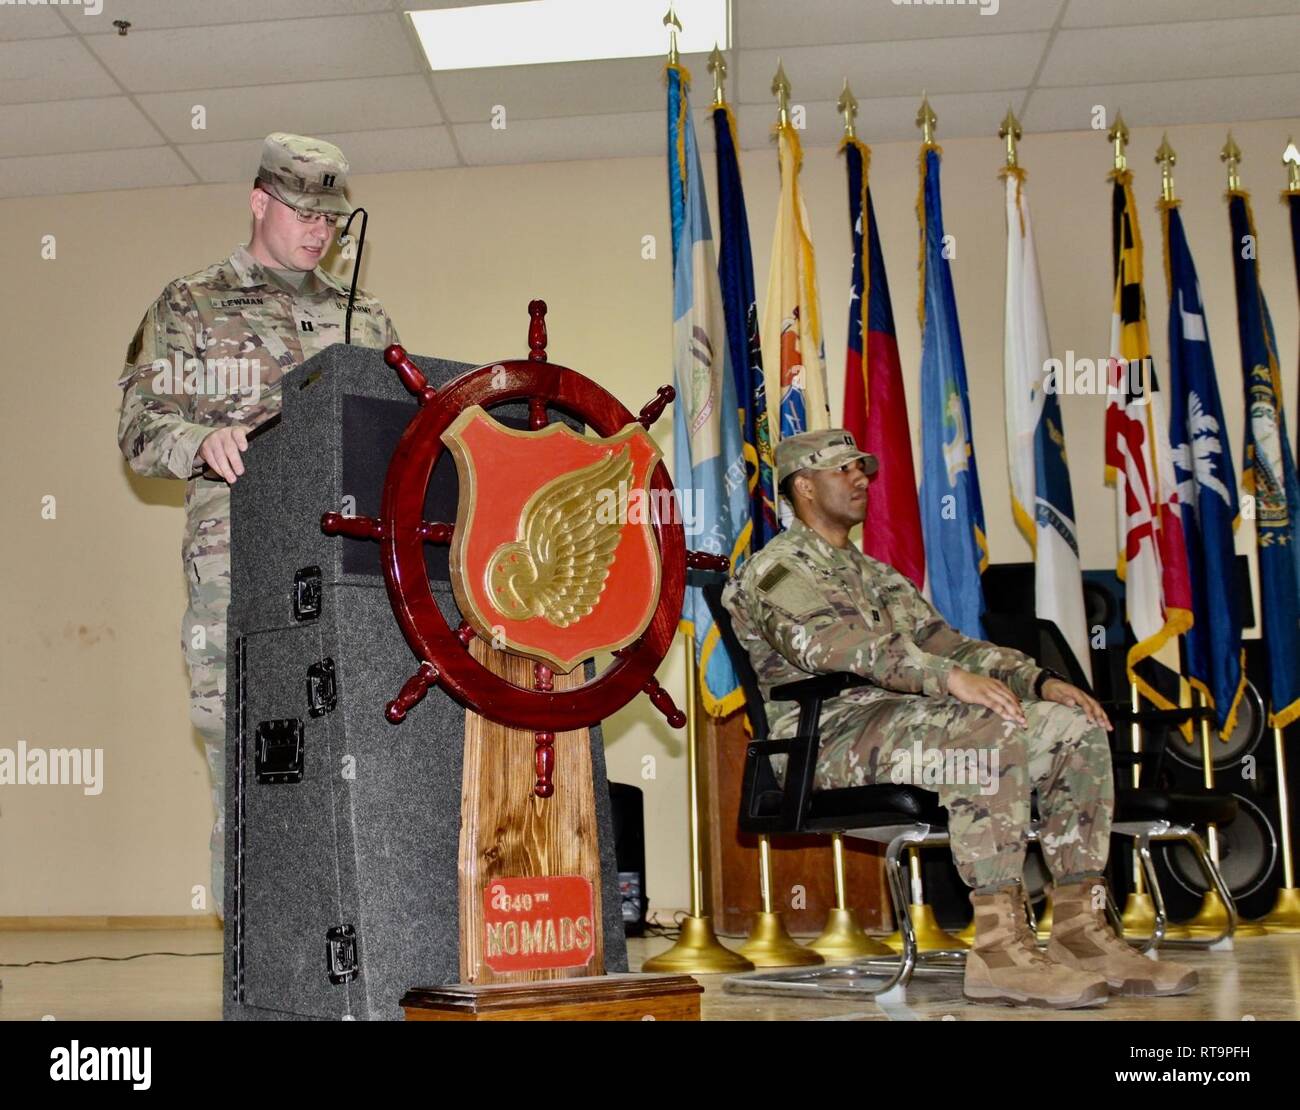 Capt. Willard C. Lewman makes his exiting remarks as company commander of Headquarters and Headquarters Detachment, 840th Transportation Battalion, as Capt Michael D. McDonald, the incoming commander, awaits to assume command during a change of command ceremony at Camp Arifjan, Kuwait, Jan. 31, 2019. Stock Photo